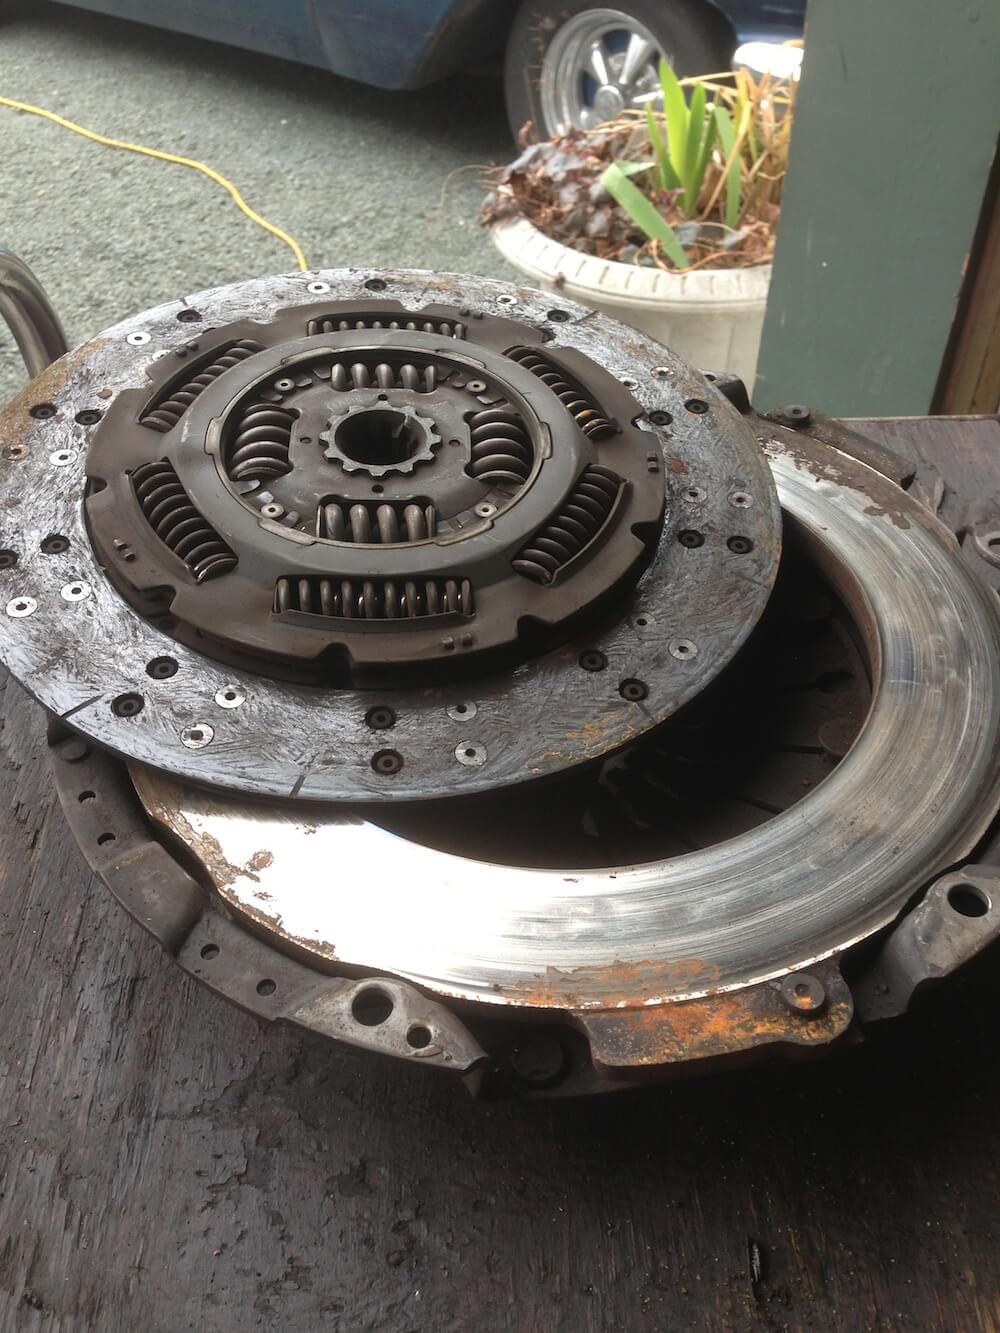 Here you can see the clutch disc and the clutch pressure plate. Both are severely worn and heavily grooved.